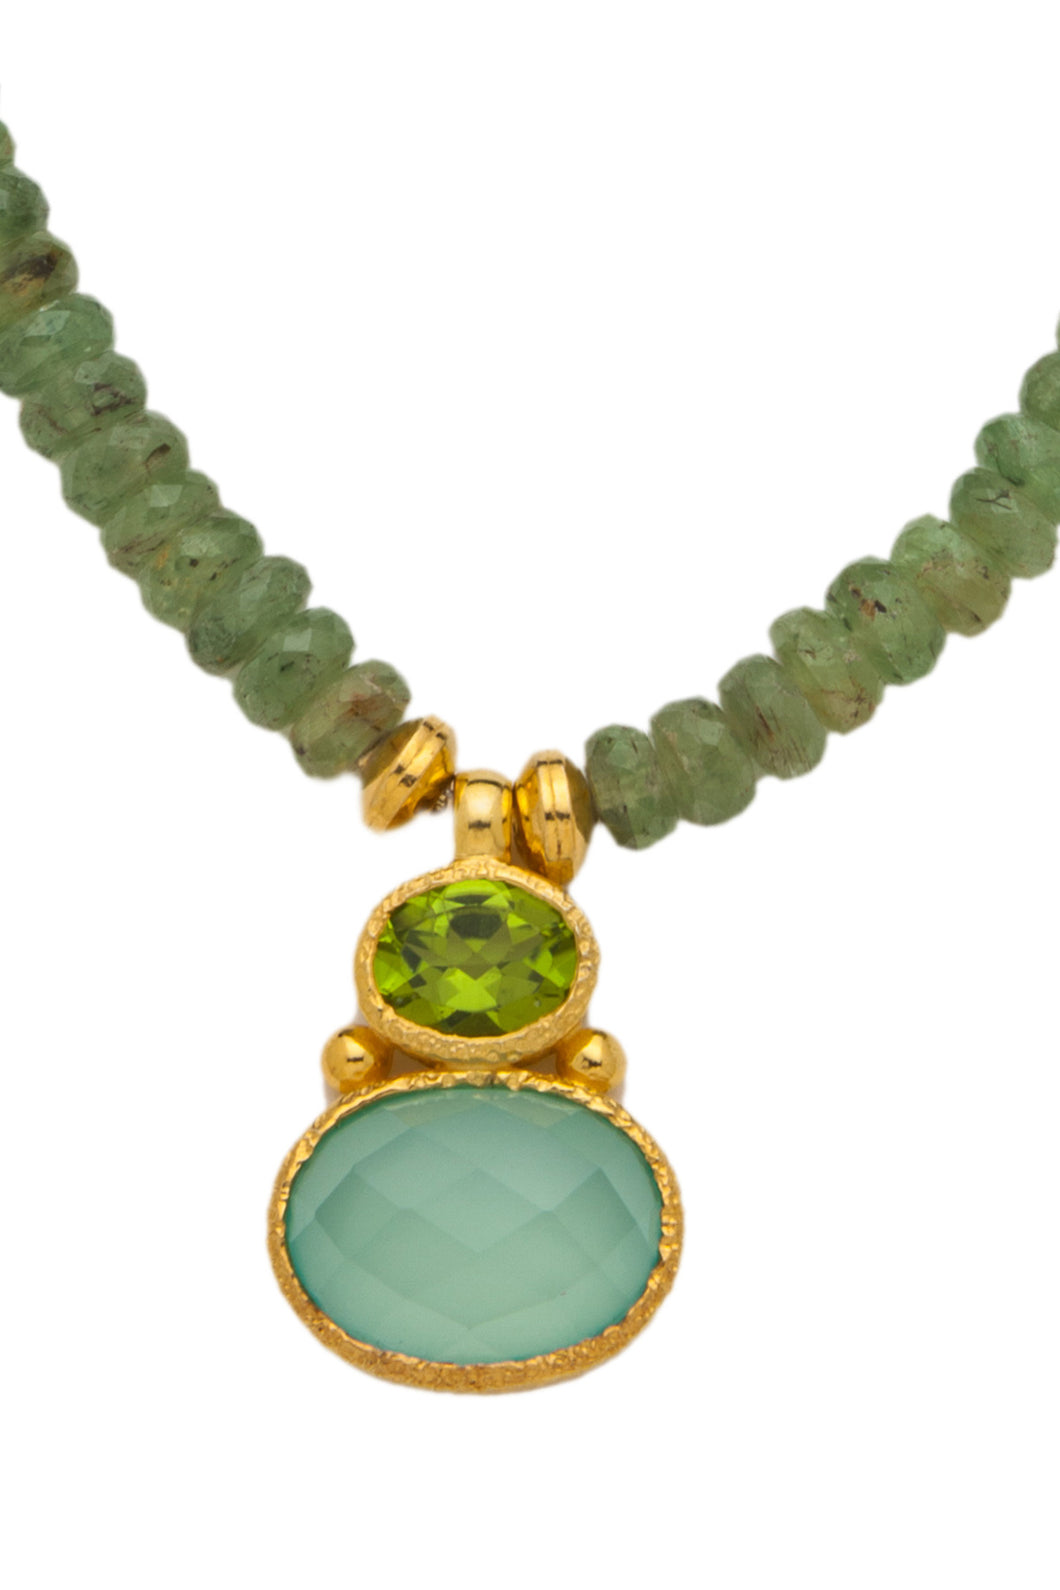 Pineapple Necklace w/Green Stone CGN-232Grn – Song Lily